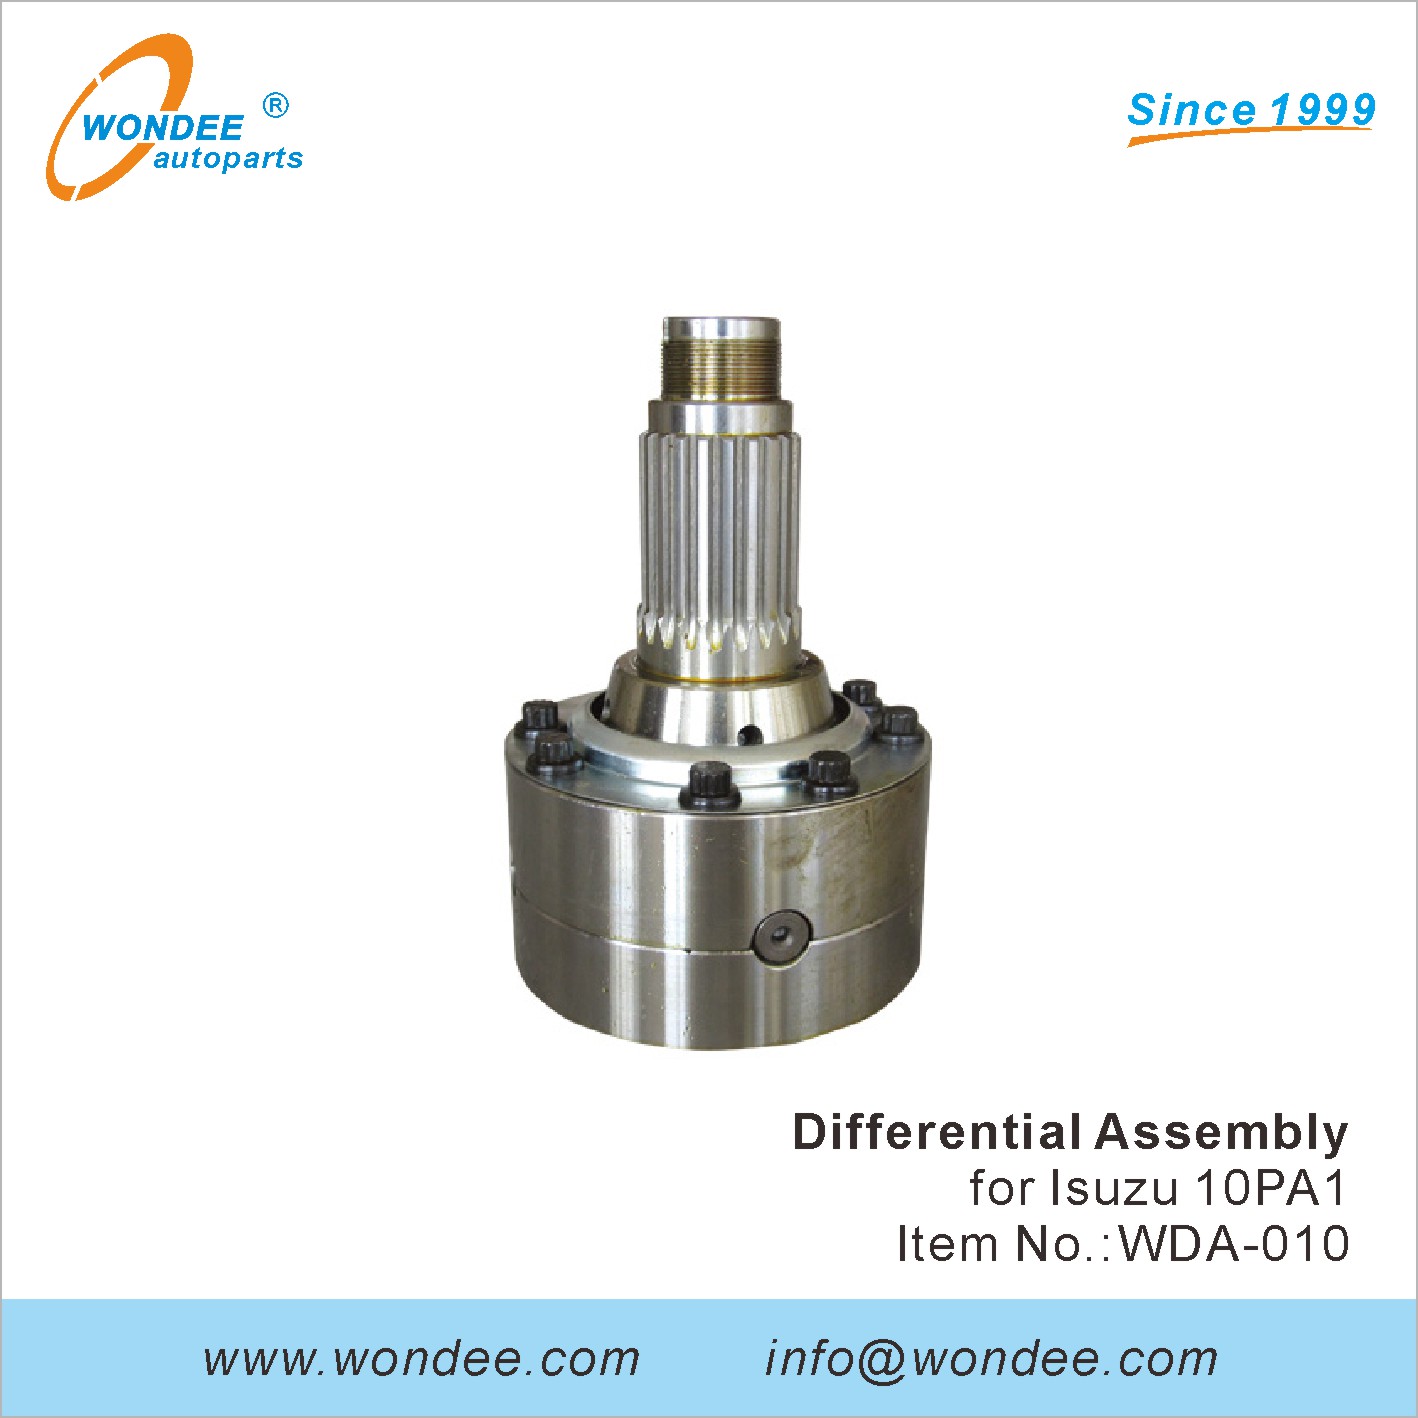 WONDEE differential assembly (10)